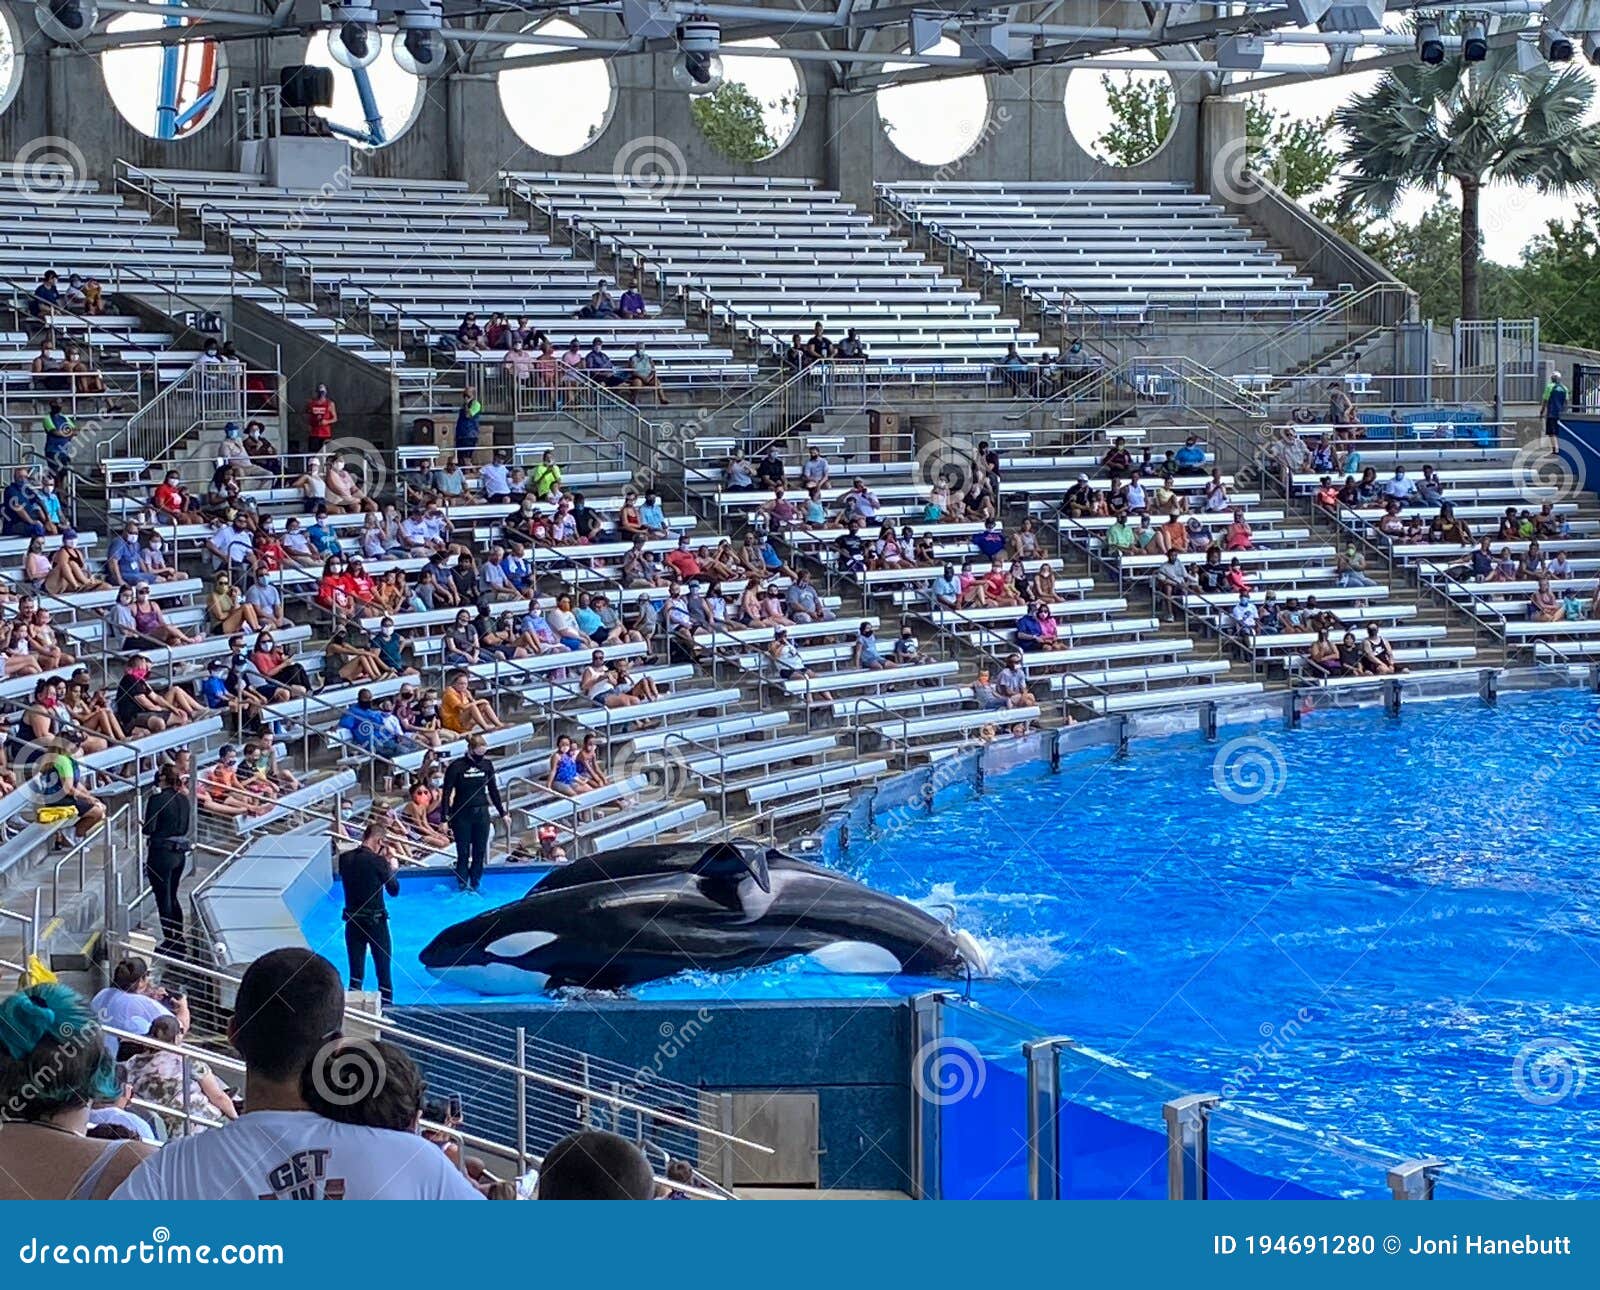 The Orca or Killer Whale Exhibit at Seaworld Editorial Image - Image of ...